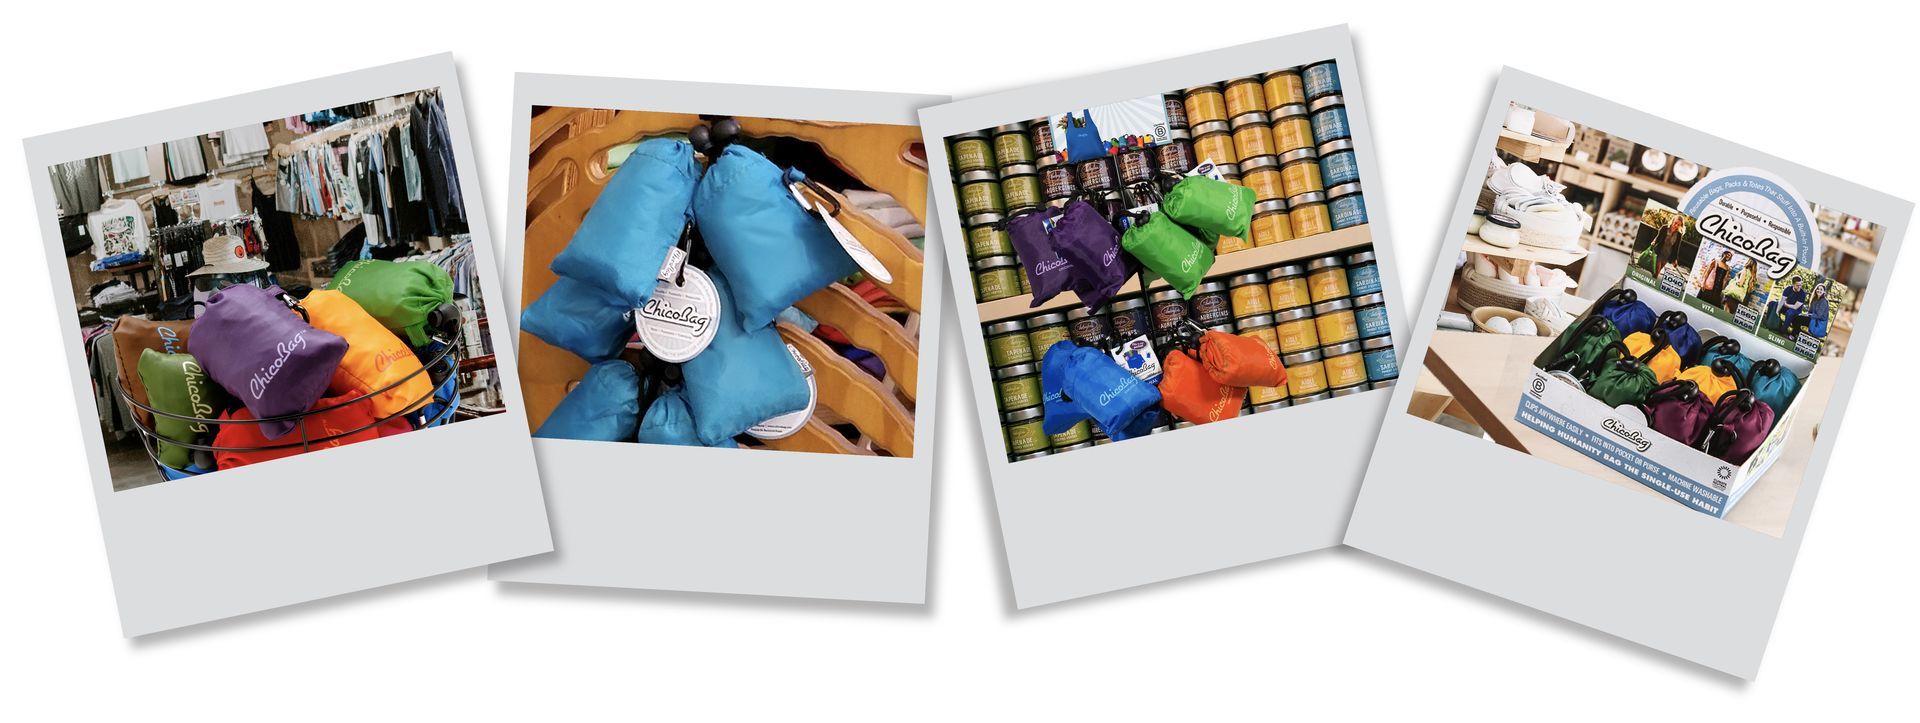 four Polaroids showing Chicobag's product displays that help support our distributors